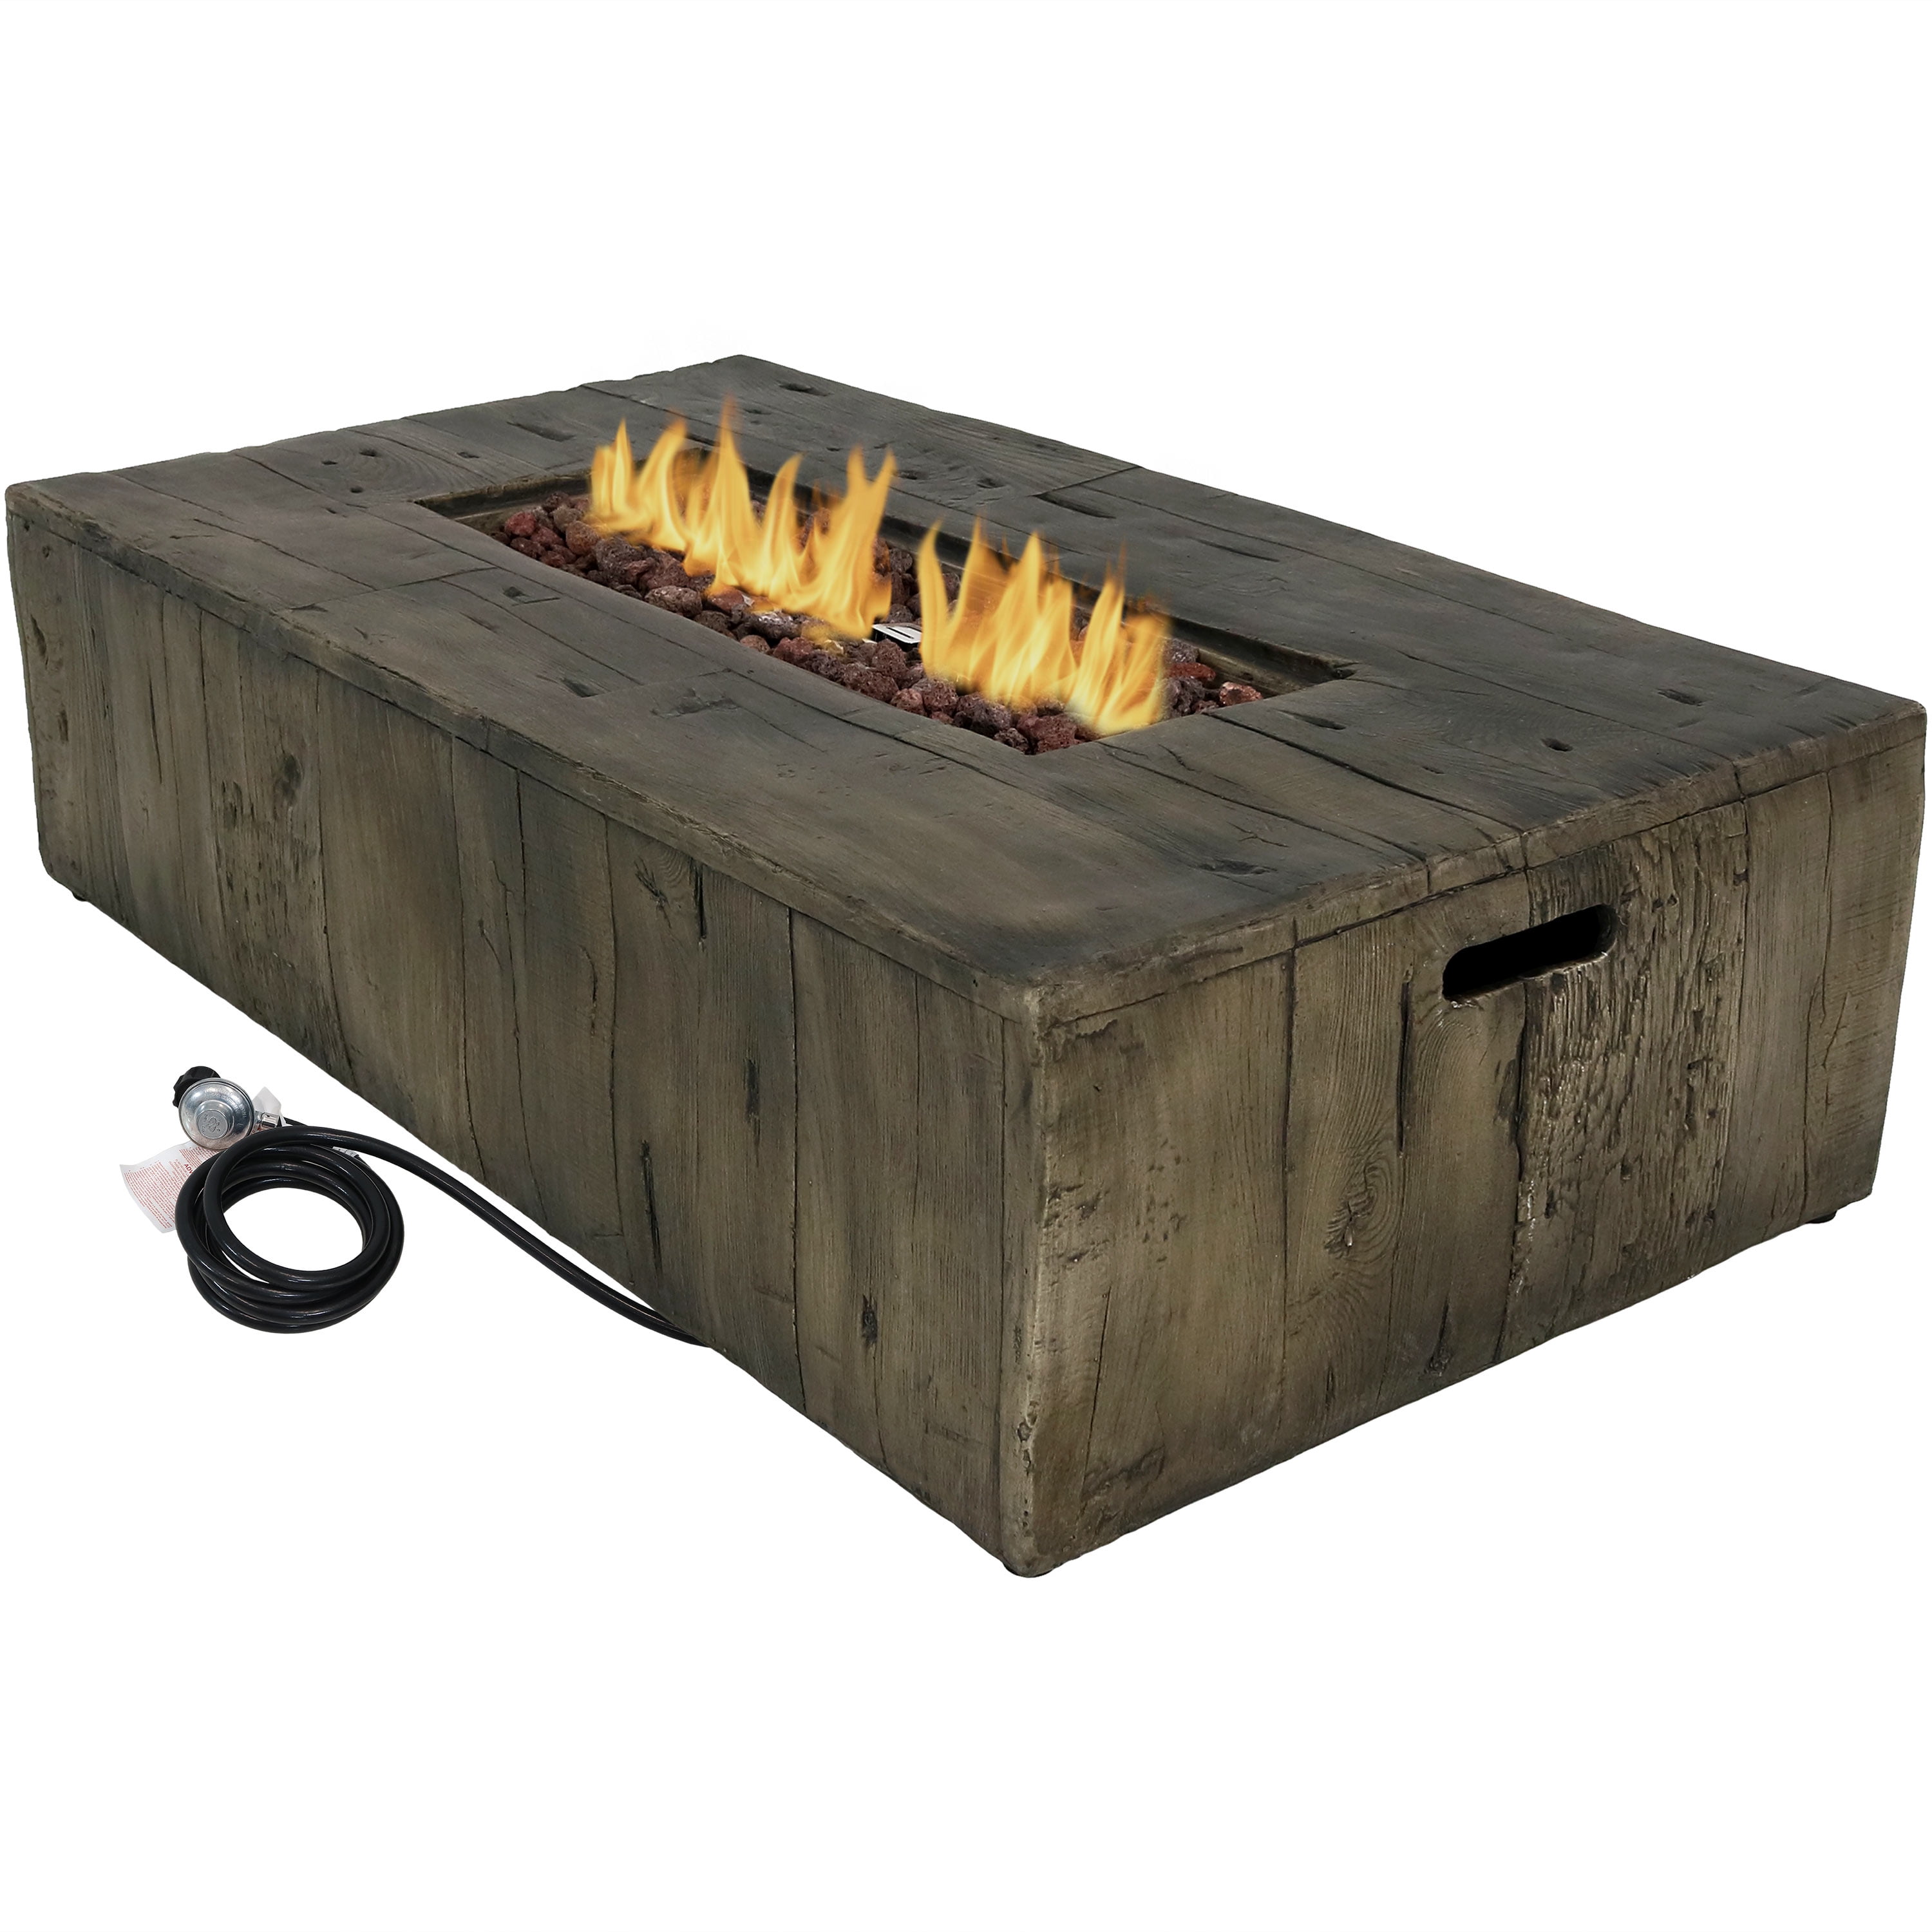 Sunnydaze Rustic Propane Gas Fire Pit Table with Outdoor Weather-Resistant  Durable Cover and Lava Rocks - Faux Wood Patio Fire Table - 48-Inch -  Walmart.com